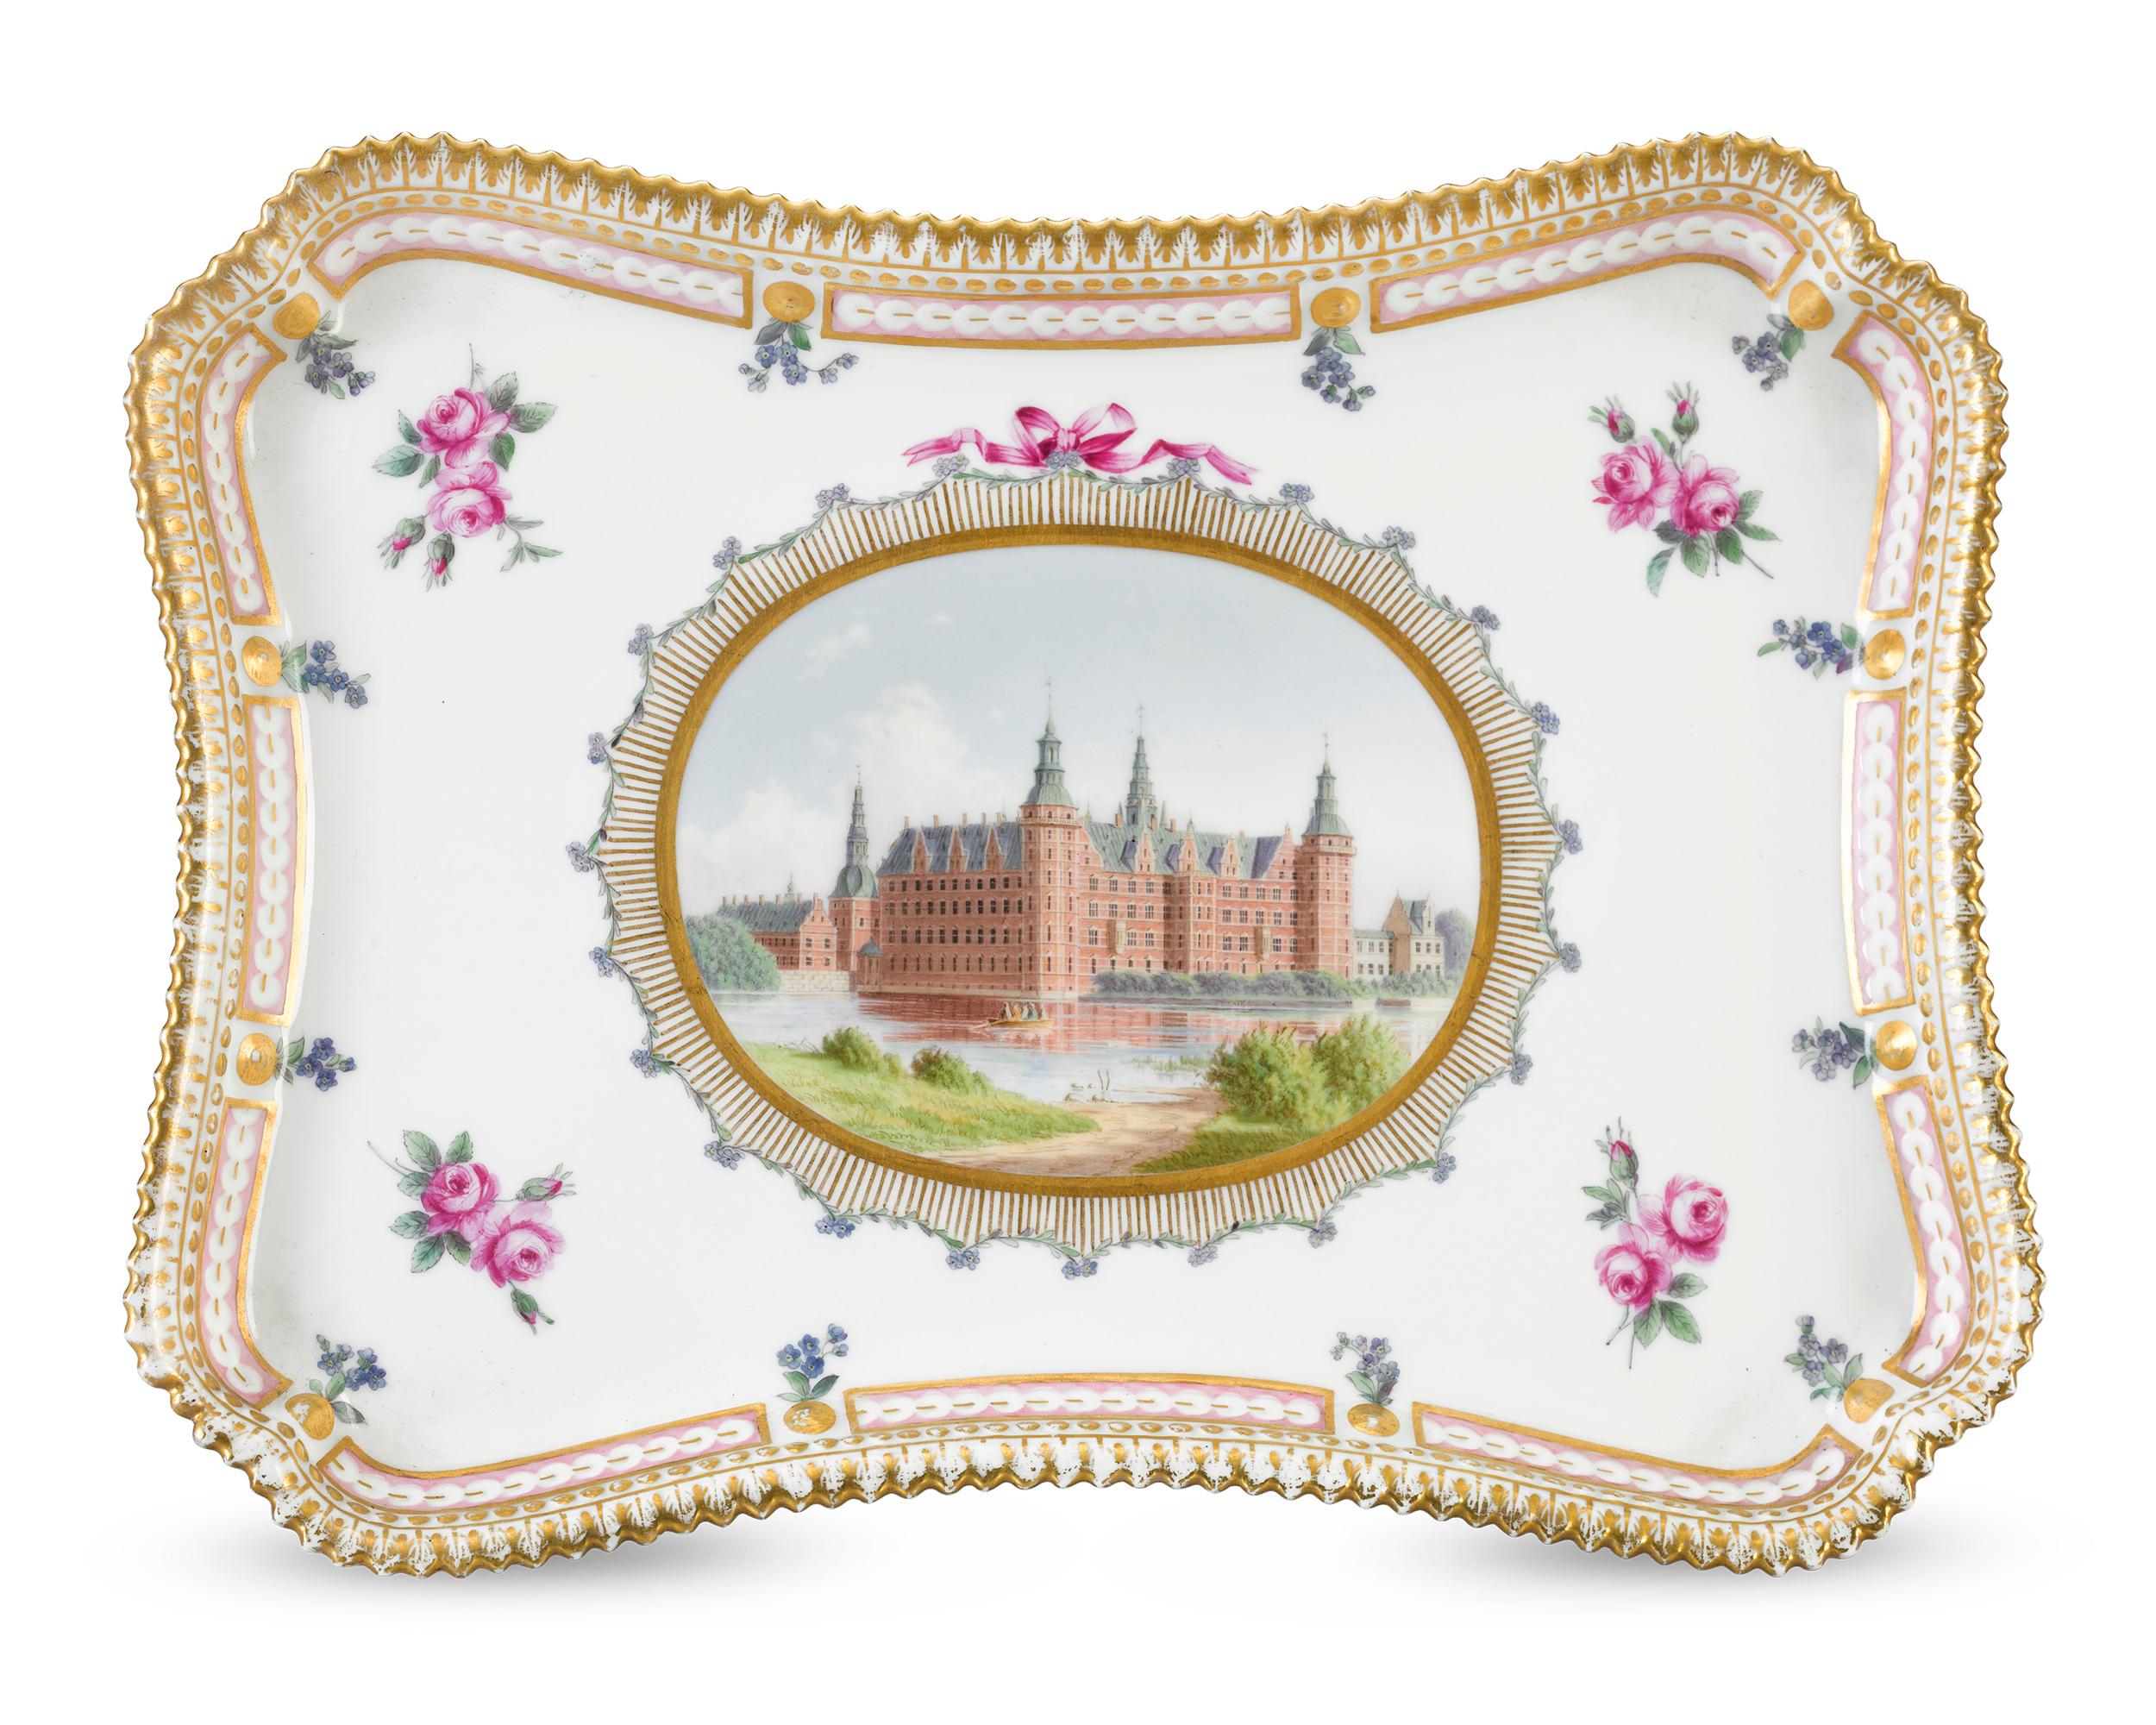 This exceptional porcelain tray captures the palatial facade of Frederiksborg castle in Denmark. Built by King Christian IV in the early 17th century, the world-famous Frederiksborg castle is the largest and most impressive Renaissance palace in the